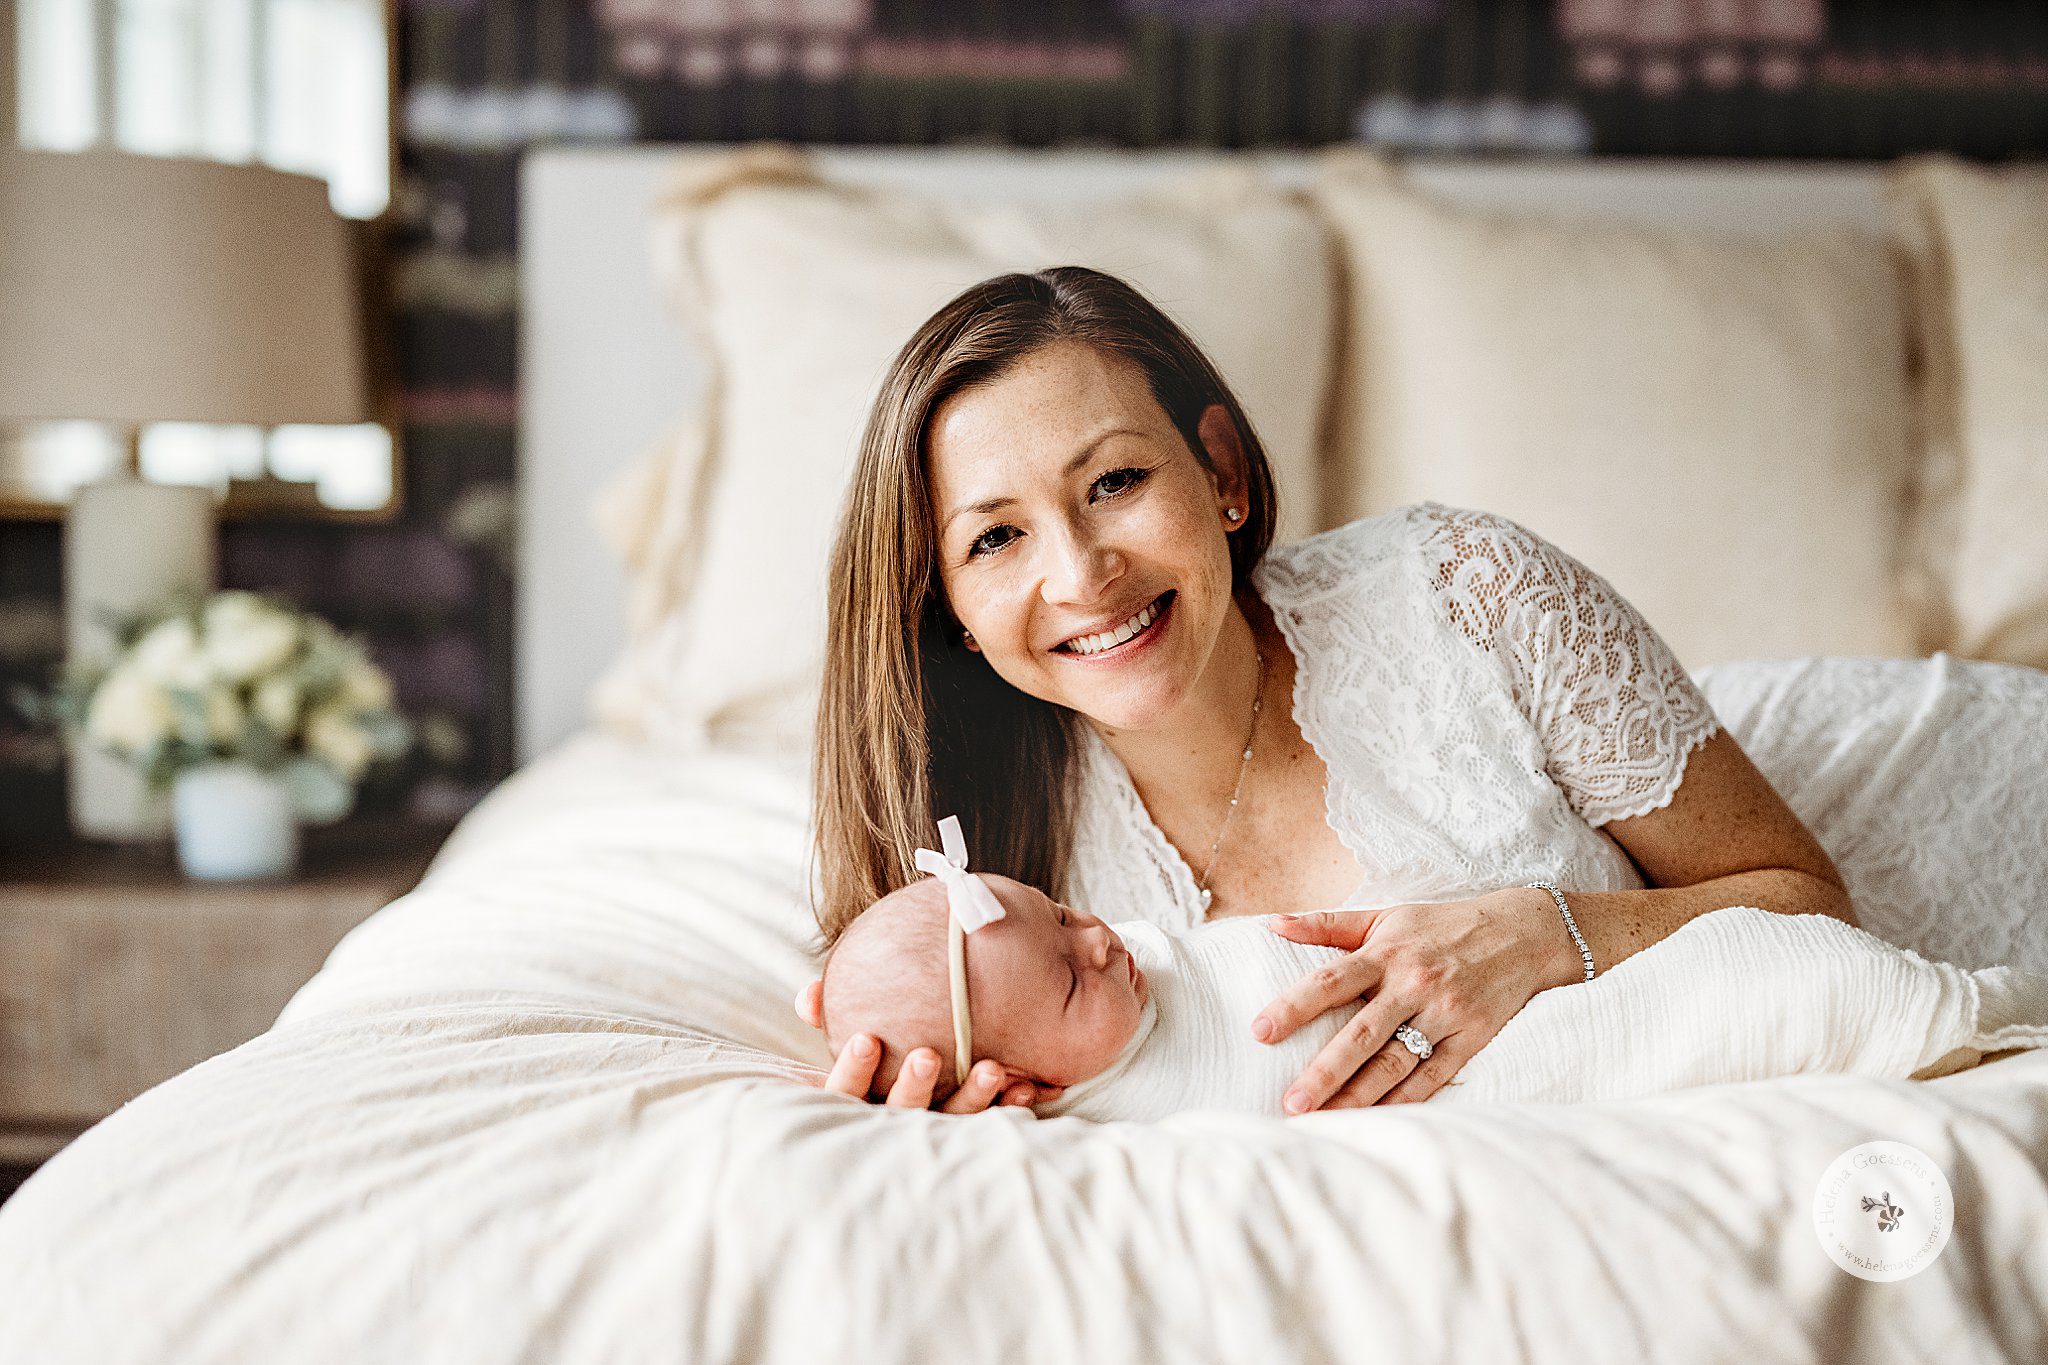 mom in white dress with lace sleeves lay on bed with baby girl in white wrap 